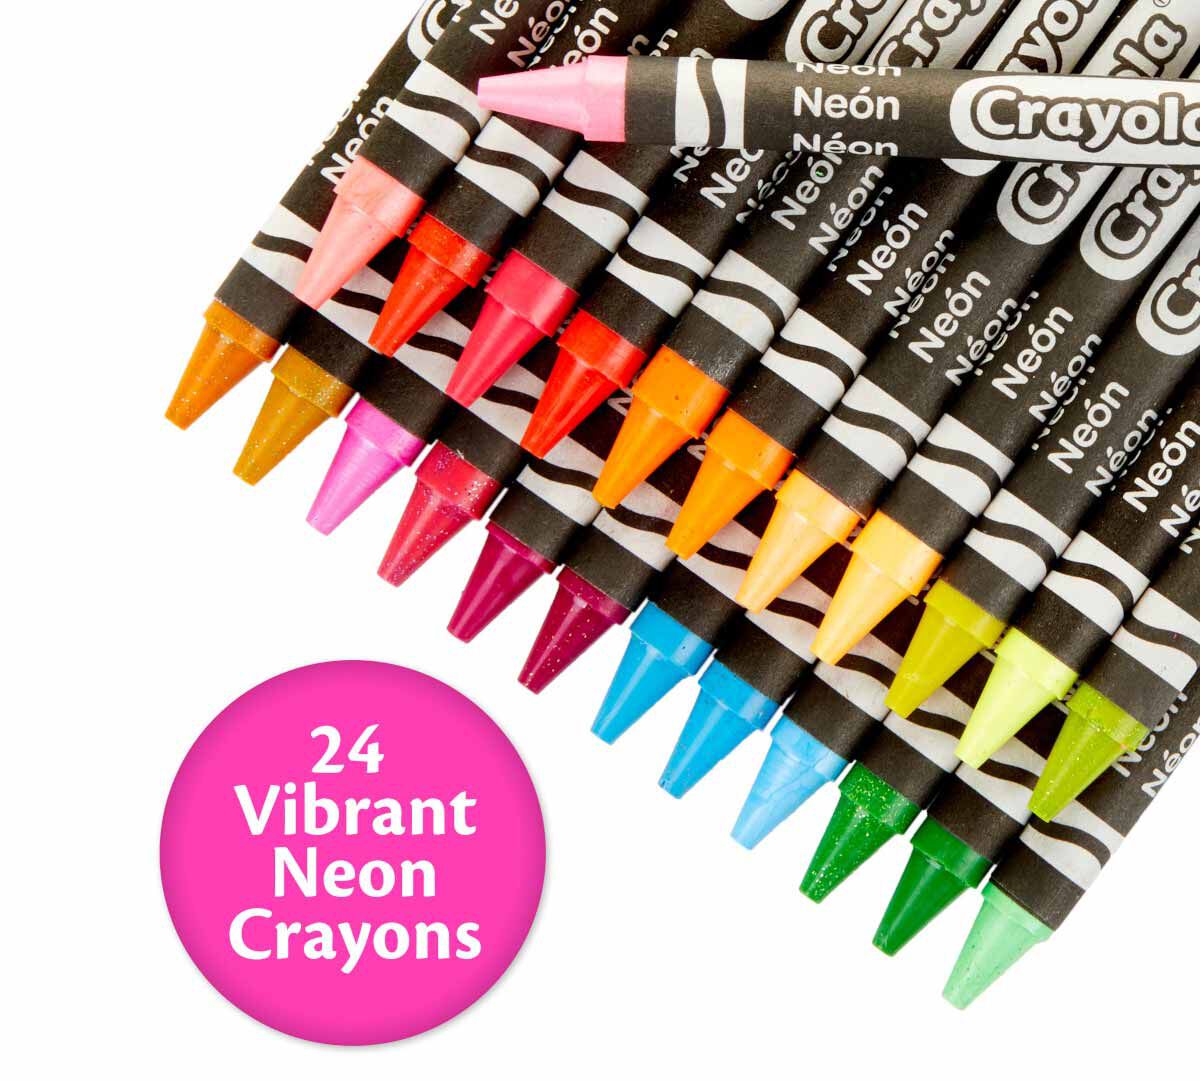 Crayola Self-Adhesive Paper Letters, Assorted Neon Colors, 4, 180 Characters per Pack, 3 Packs